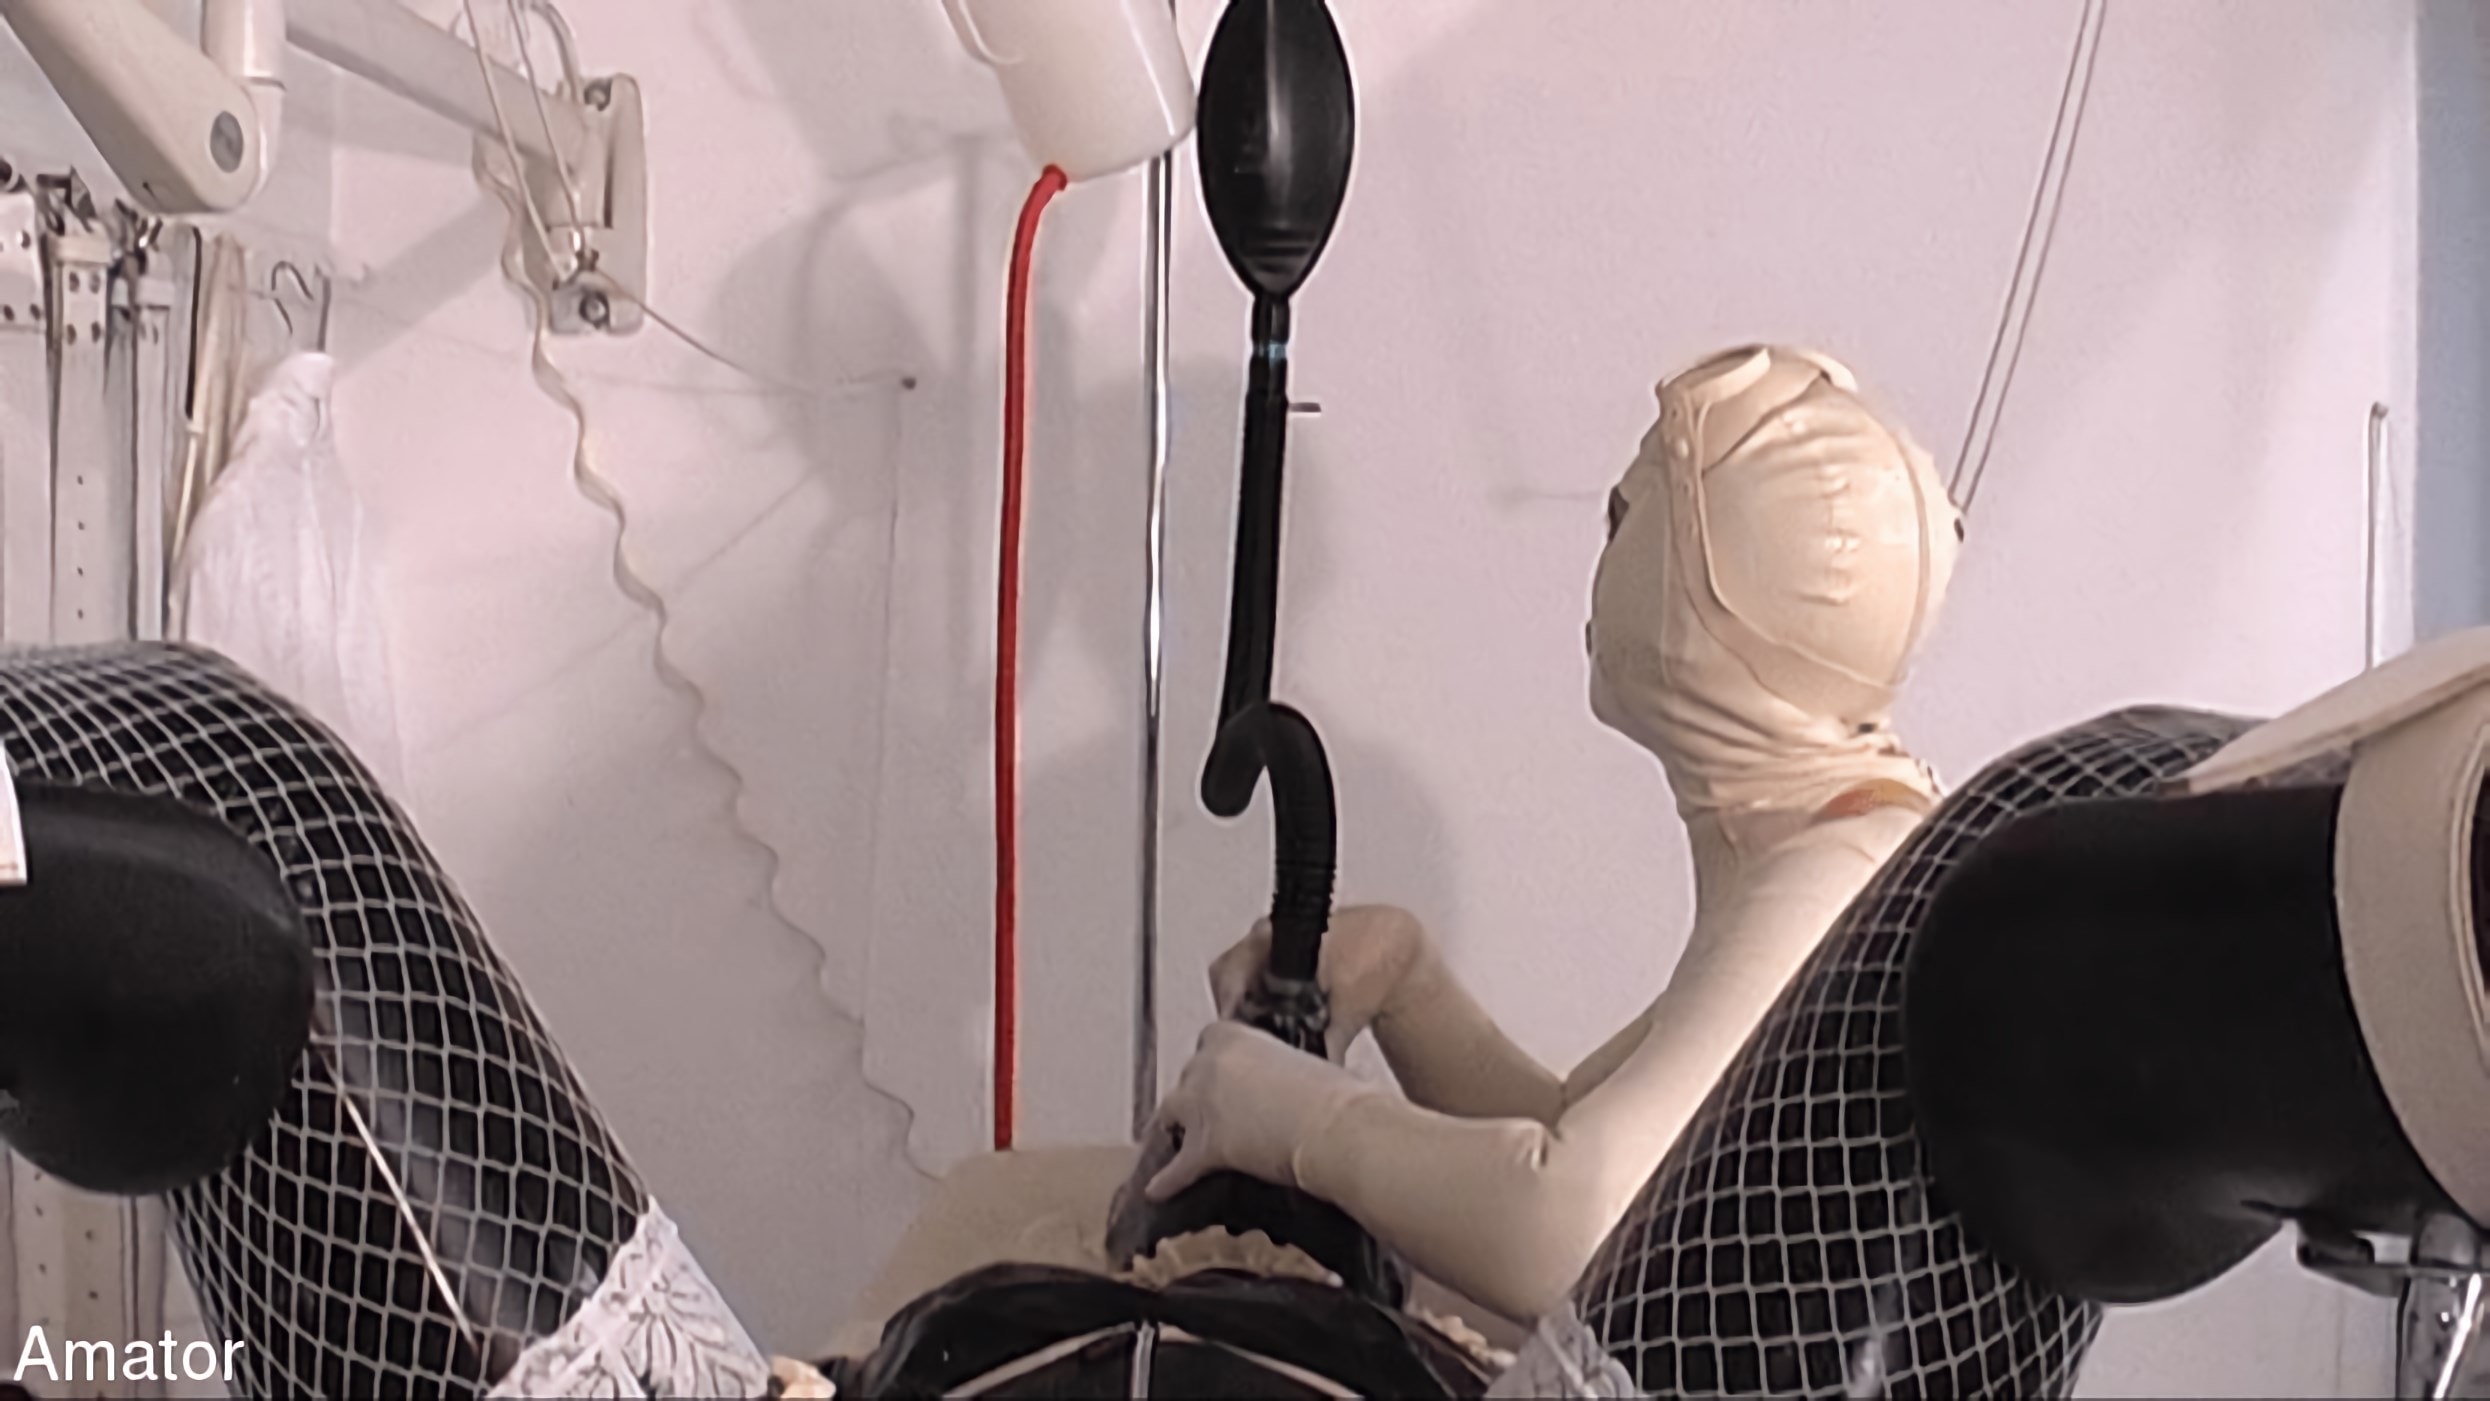 Kink Partners 'The rubber maid in the clinic part 2' starring Madame Zoe (Photo 4)